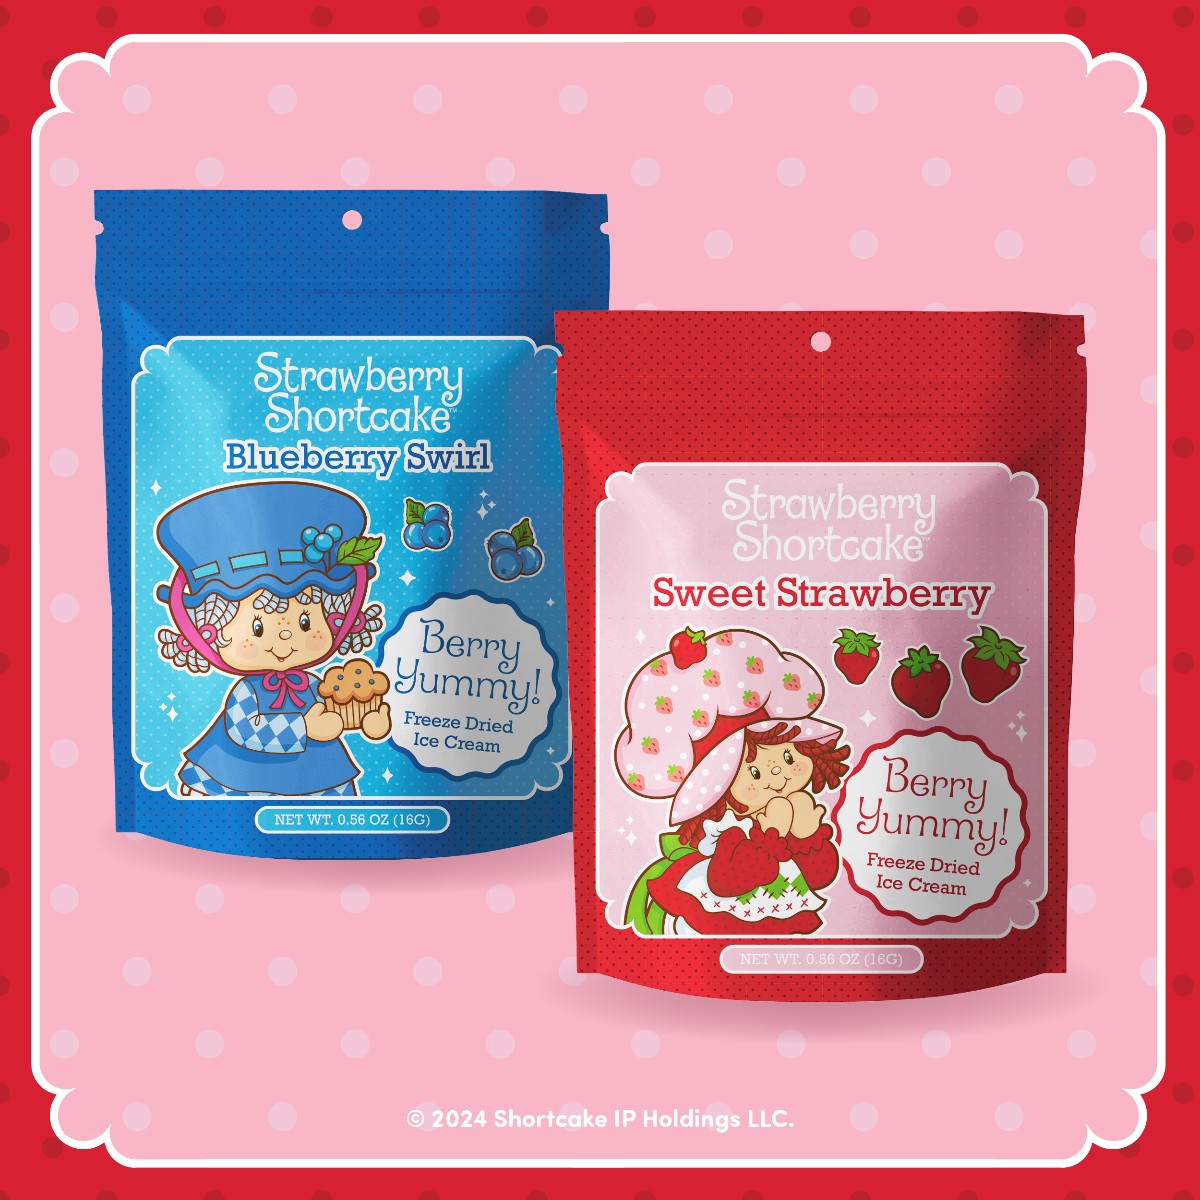 Celebrate Strawberry Month by treating yourself to our exclusive collection featuring all things strawberrylicious!🍓 🍰 brnw.ch/21wJFs3 #Strawberry #StrawberryShortcake #StrawberryMonth #Sweet #fyeexclusive